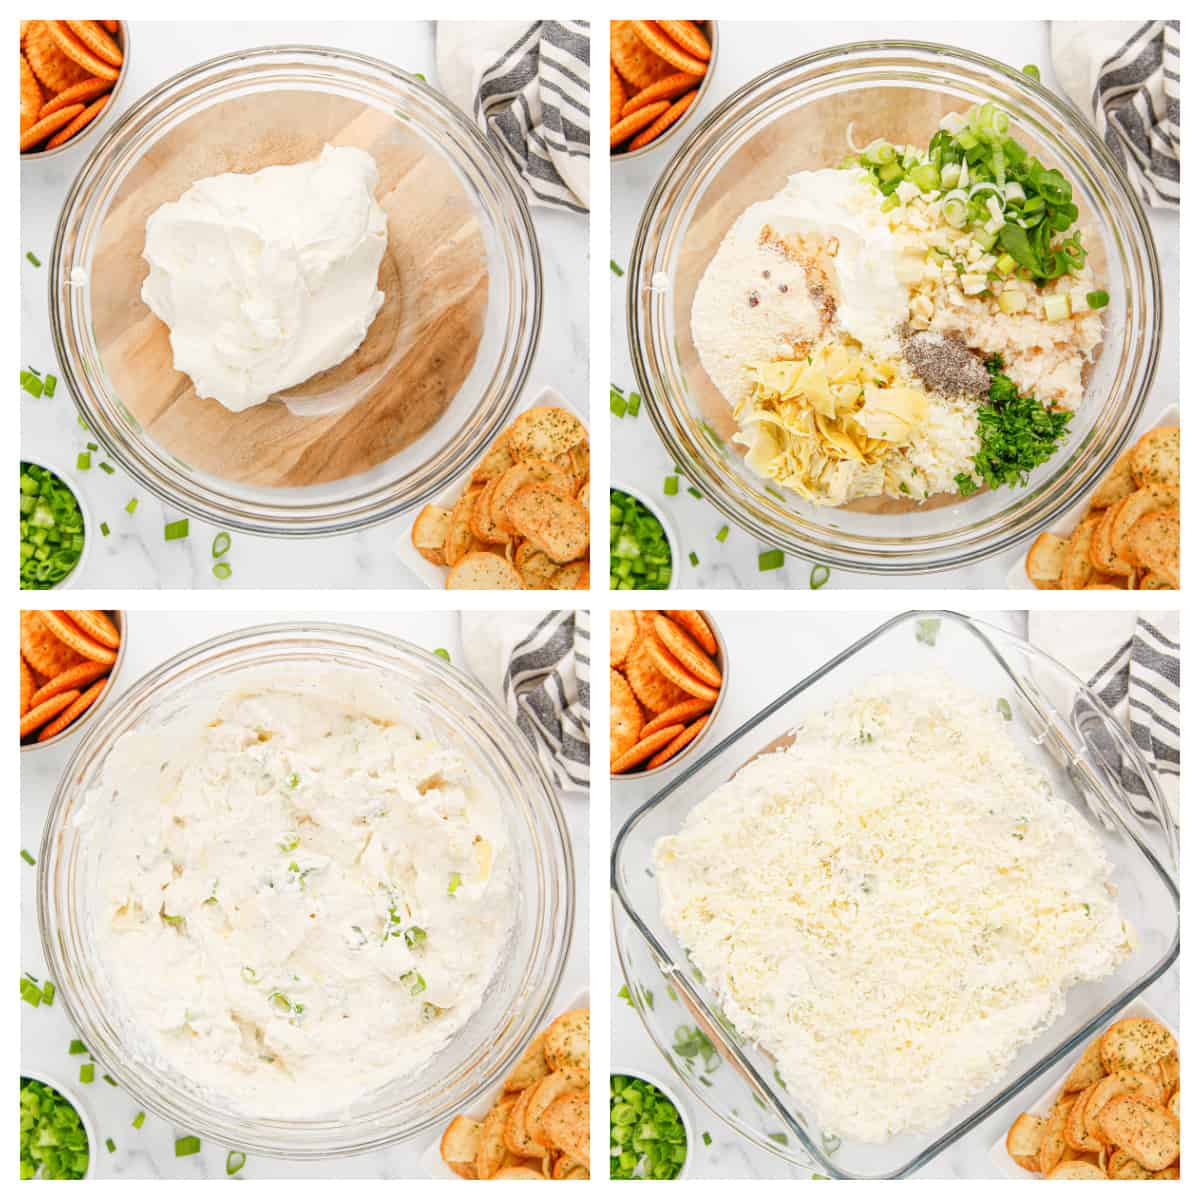 Collage showing how to make artichoke dip with crab.